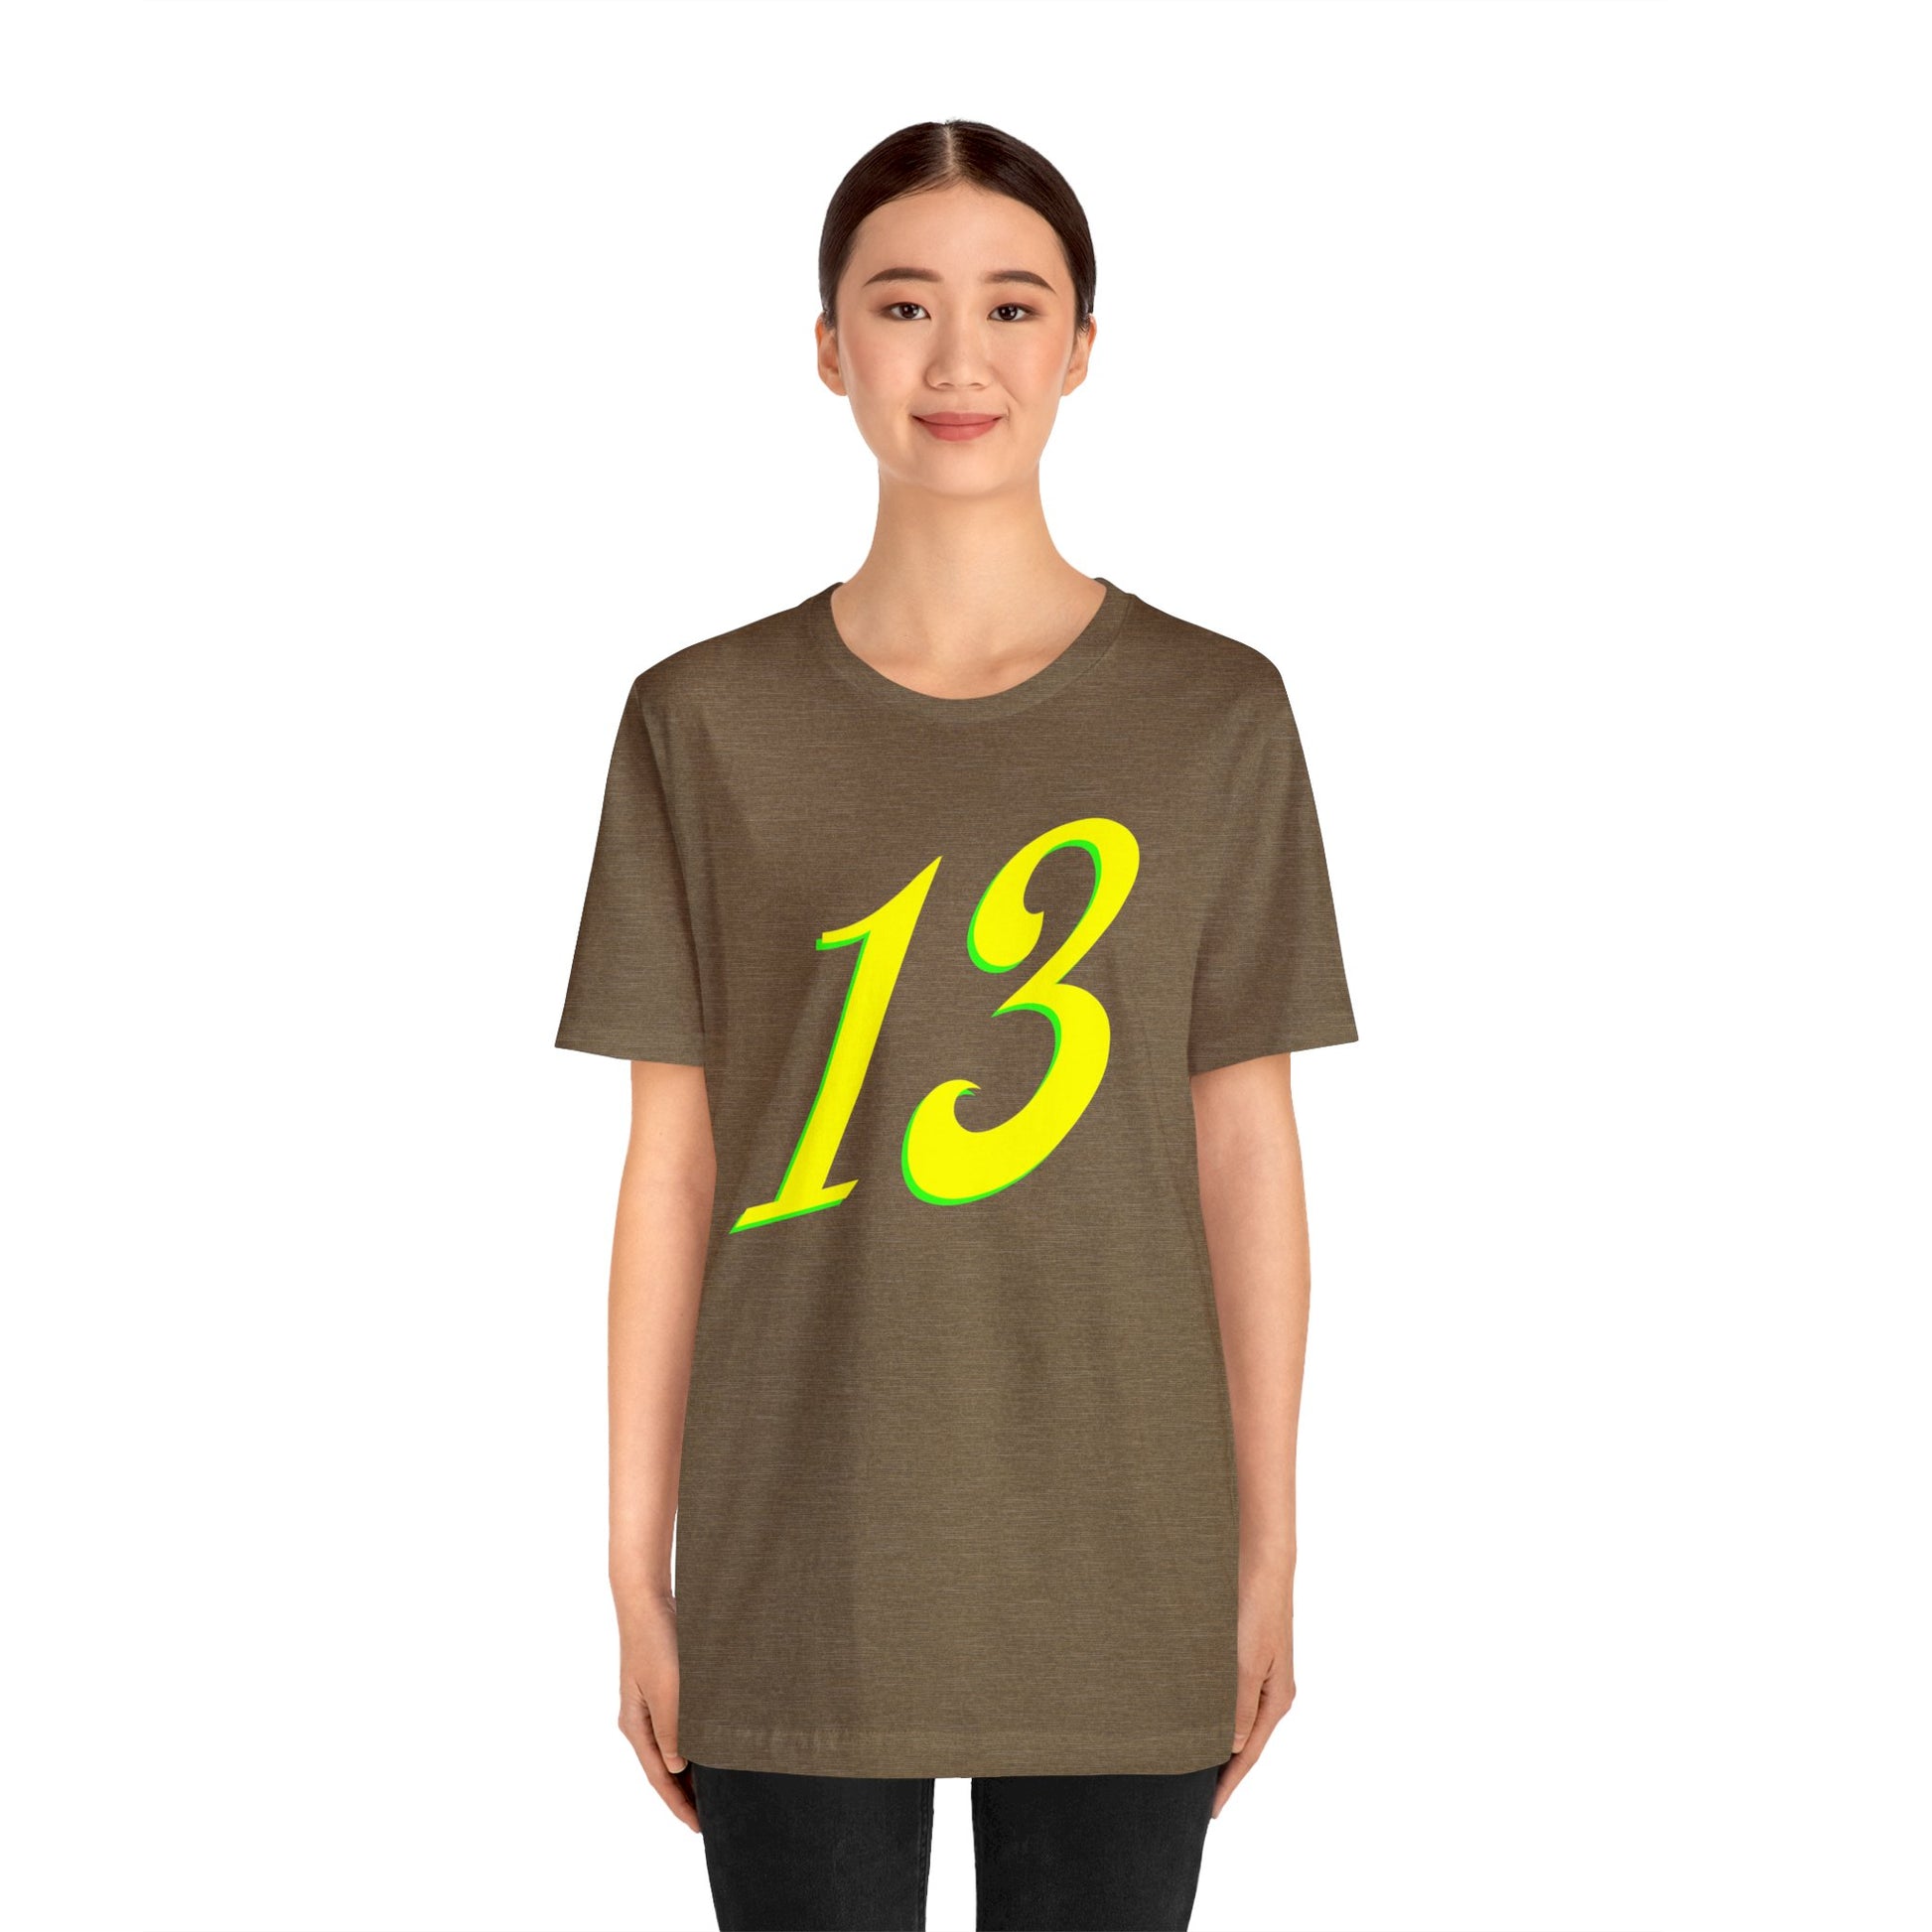 Number 13 Design - Soft Cotton Tee for birthdays and celebrations, Gift for friends and family, Multiple Options by clothezy.com in Black Size Medium - Buy Now